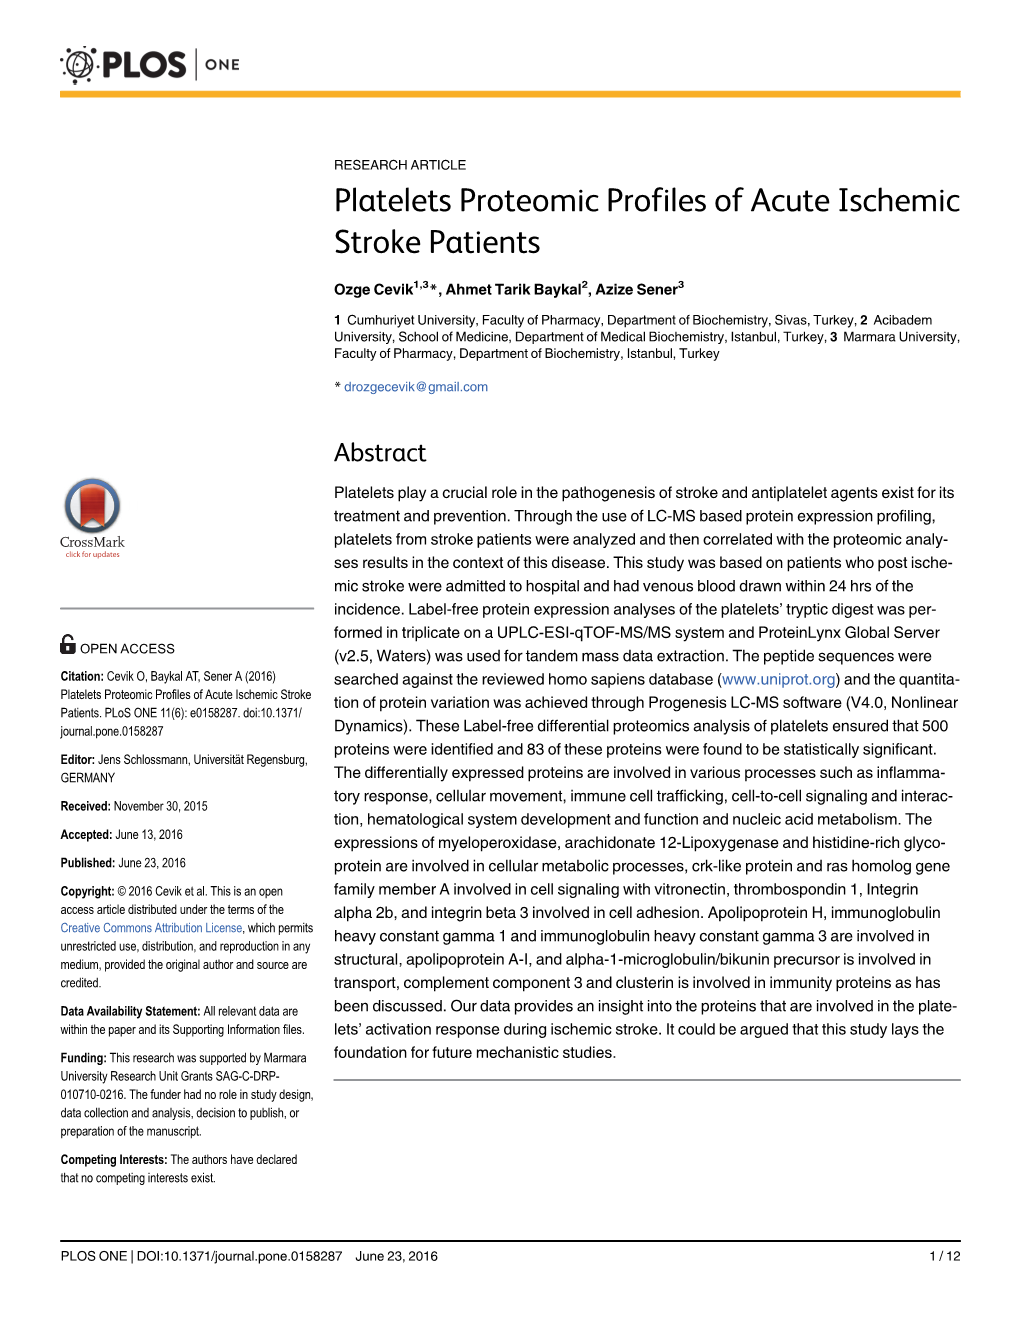 Platelets Proteomic Profiles of Acute Ischemic Stroke Patients